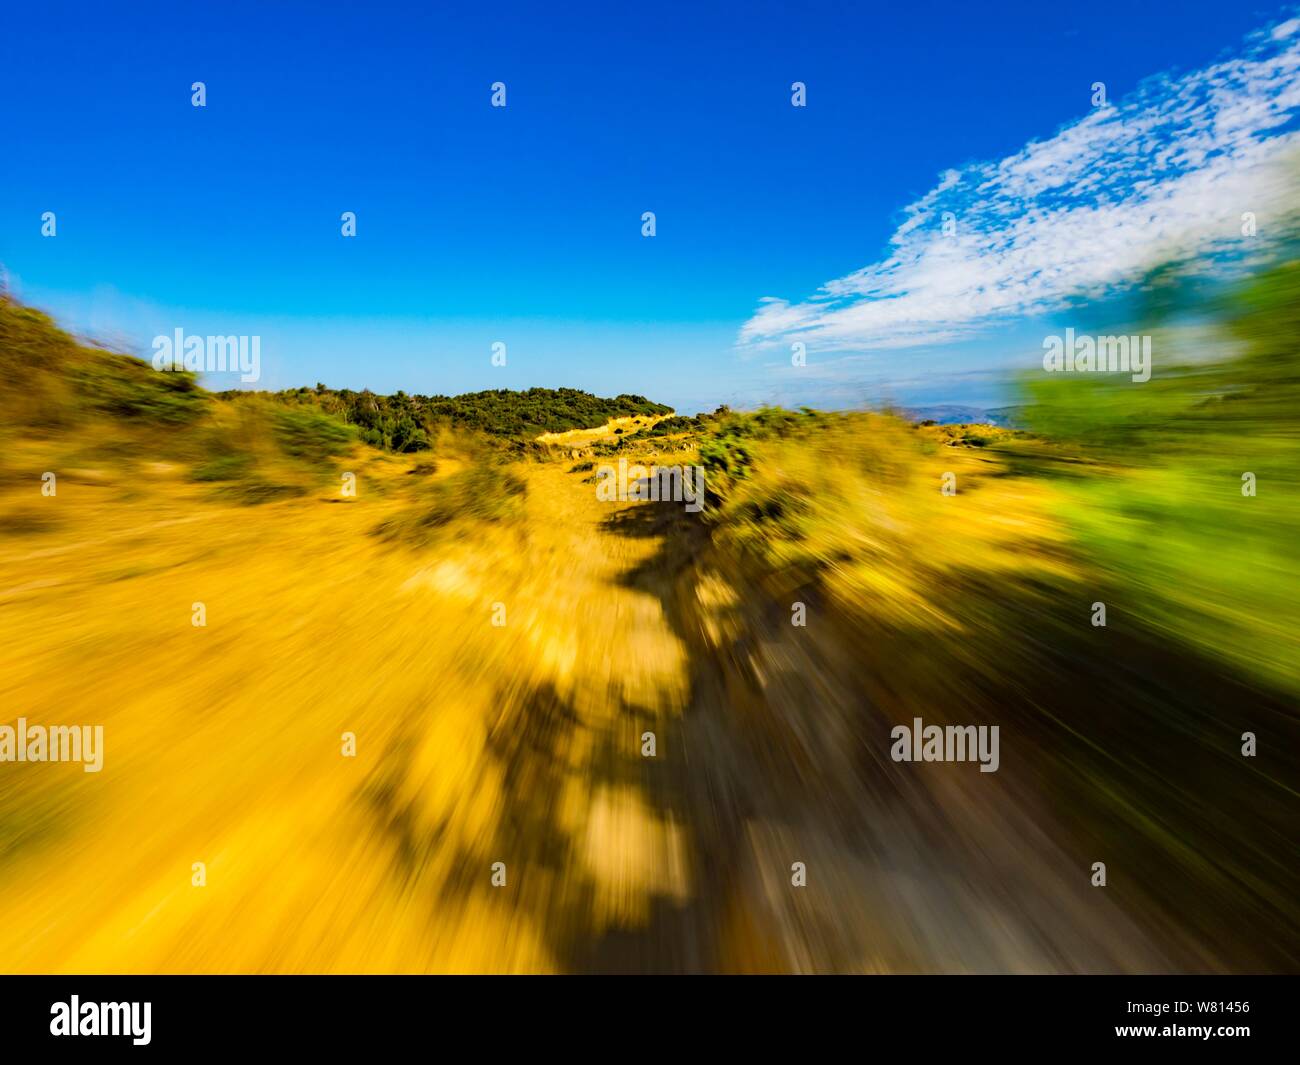 Sandy terrain vacated vacant countryside speeding low view along natural rocky ridge shadow on ground foreground landscape natural environment Stock Photo